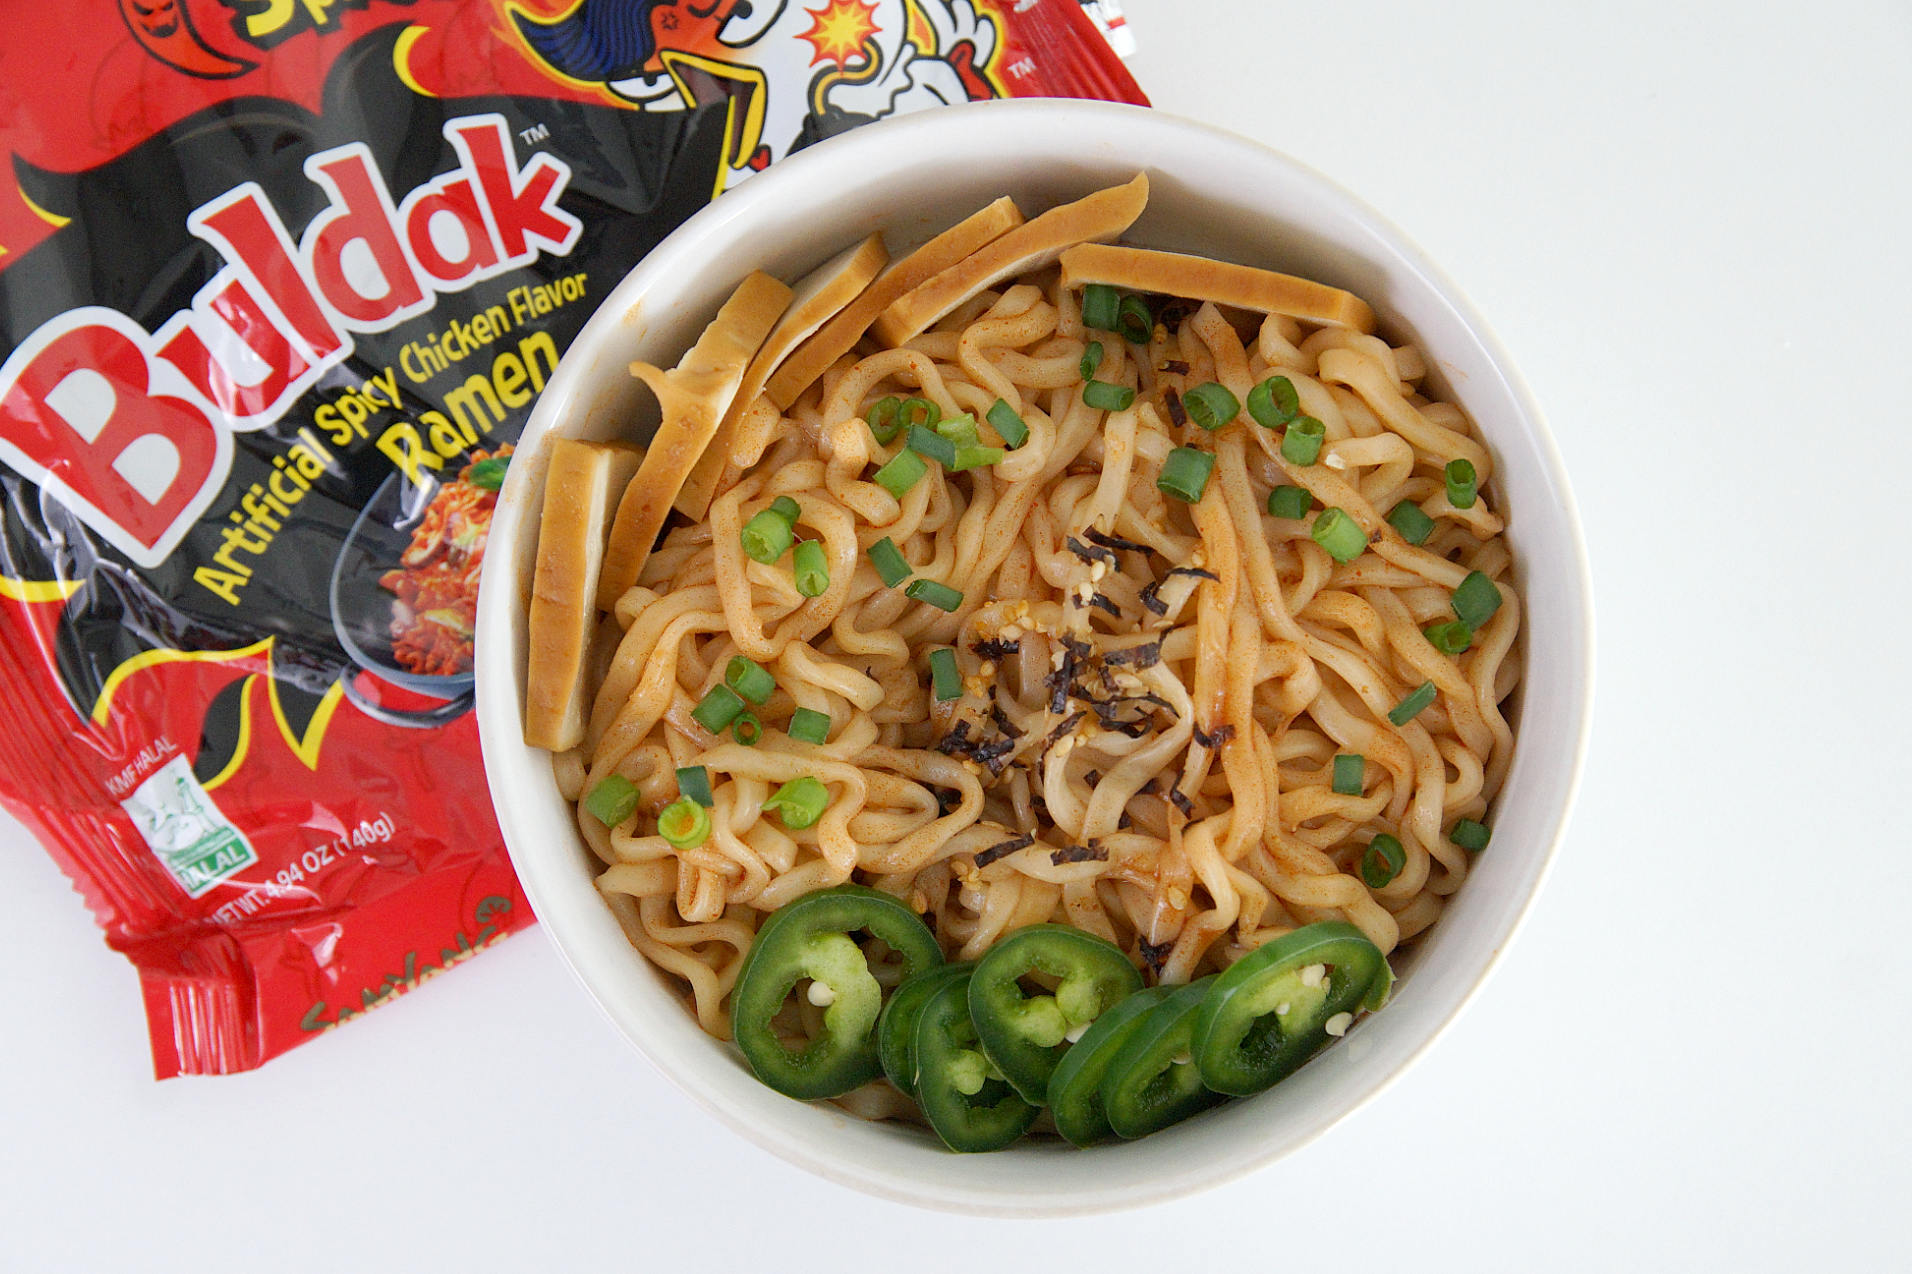 Spicy fire noodles by Samyang Foods with tofu and jalapenos